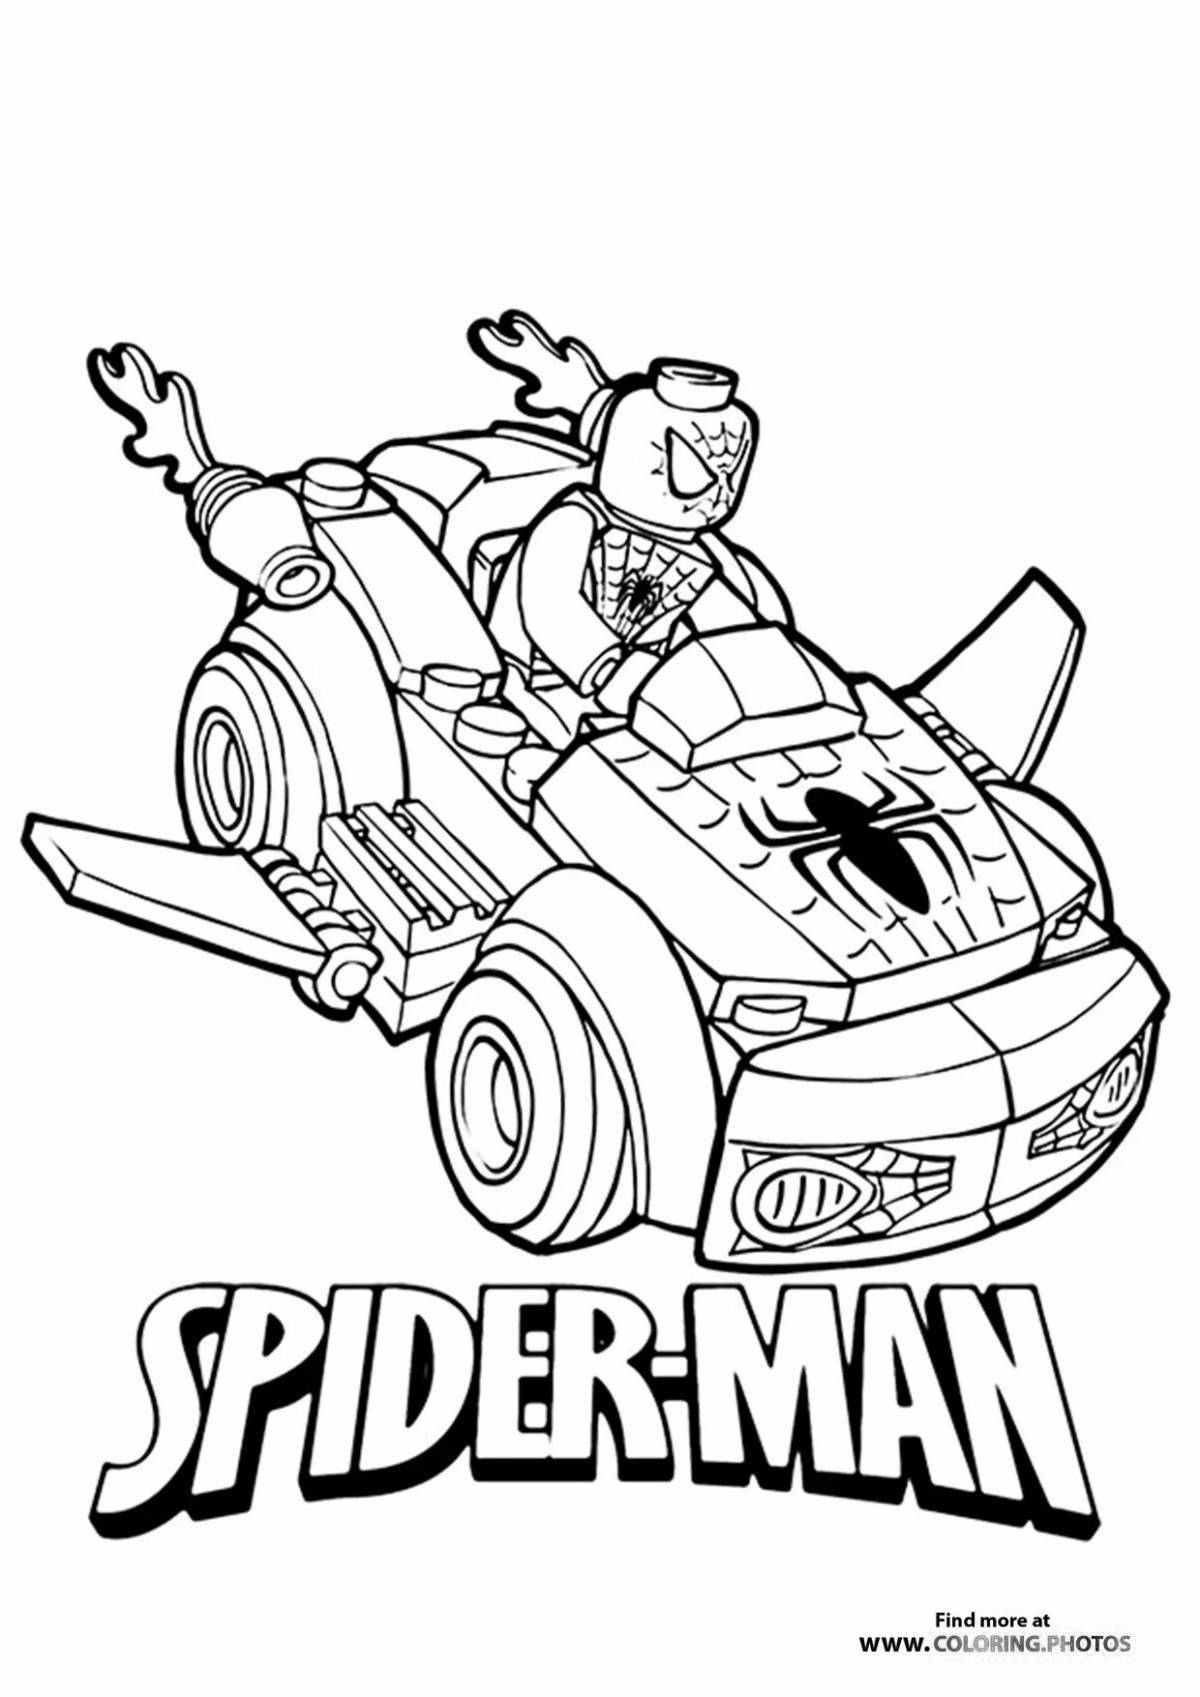 Awesome lego spiderman coloring page